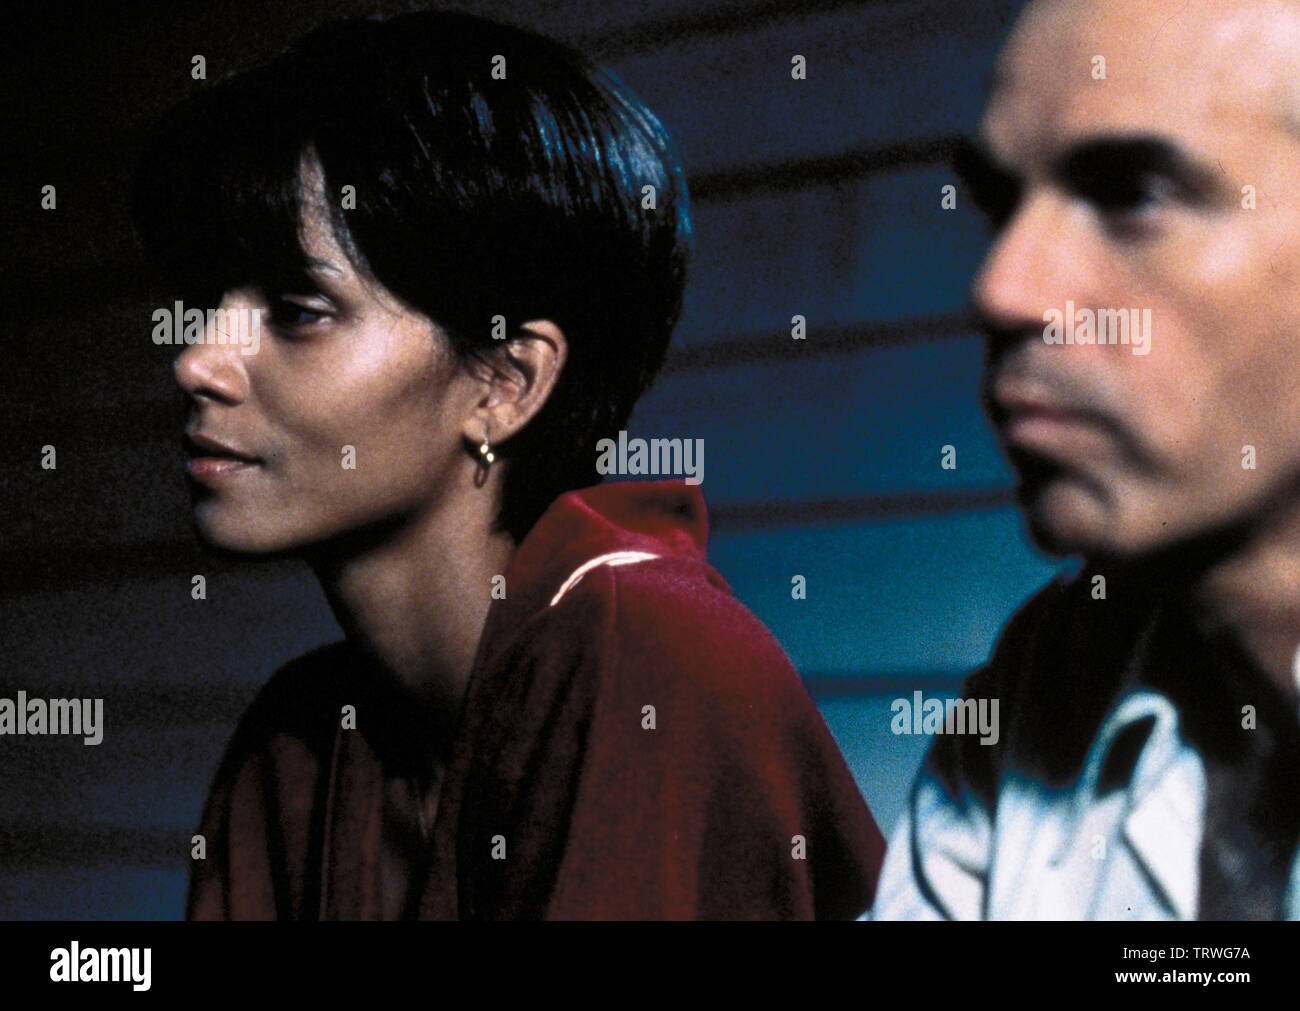 BILLY BOB THORNTON and HALLE BERRY in MONSTER'S BALL (2001). Copyright: Editorial use only. No merchandising or book covers. This is a publicly distributed handout. Access rights only, no license of copyright provided. Only to be reproduced in conjunction with promotion of this film. Credit: LEE DANIELS ENTERTAINMENT/LIONS GATE FILMS / BULLIARD, JEANNE LOUISE / Album Stock Photo